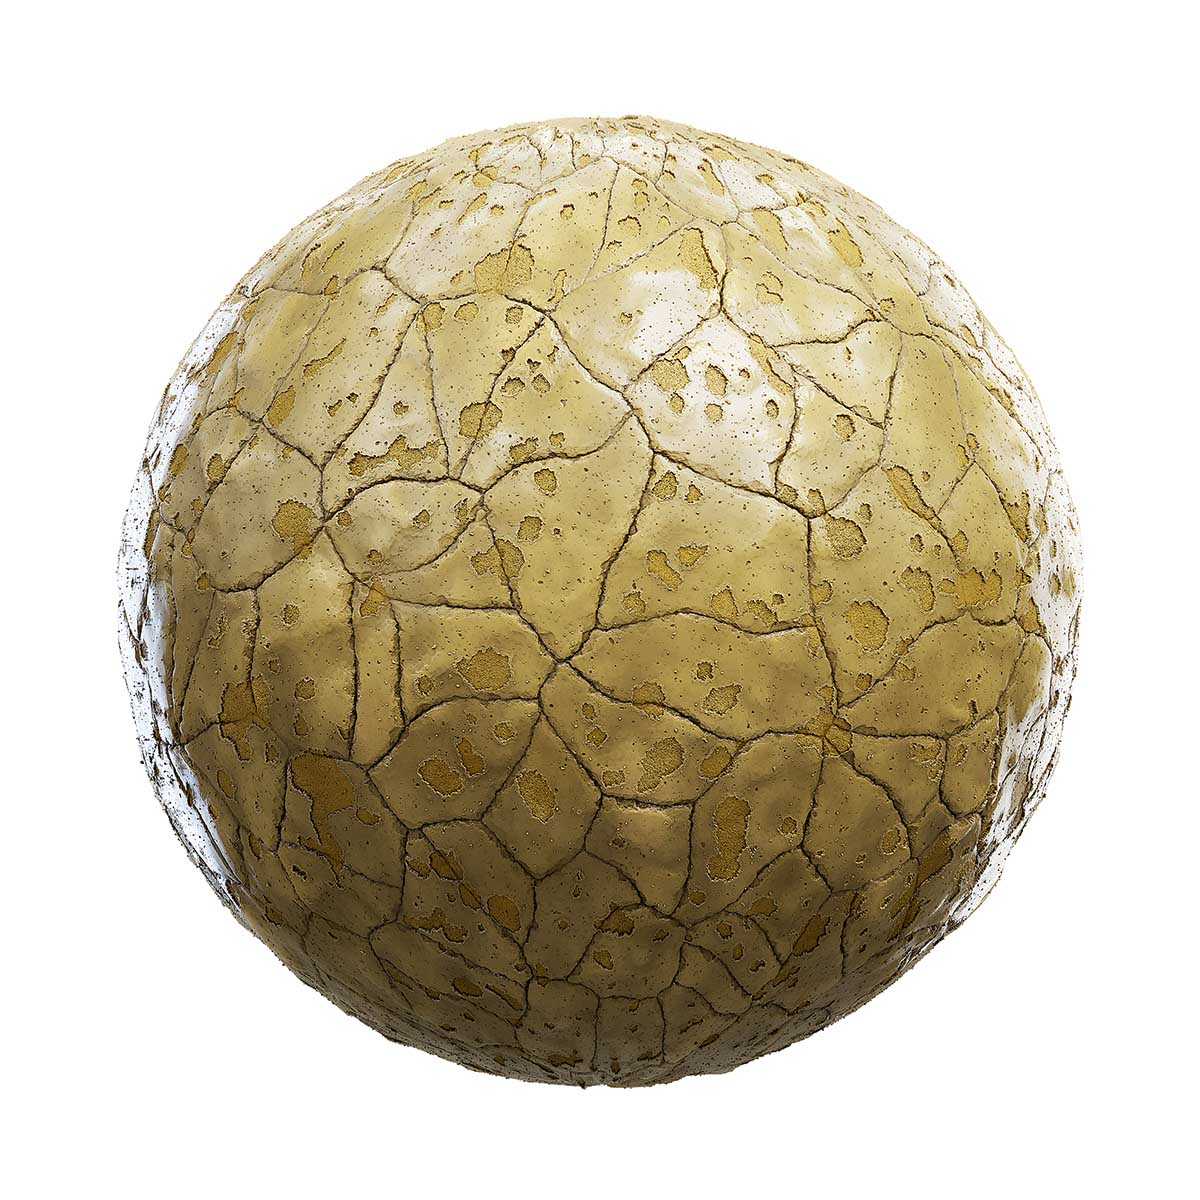 Cracked Yellow Clay Ground PBR Texture